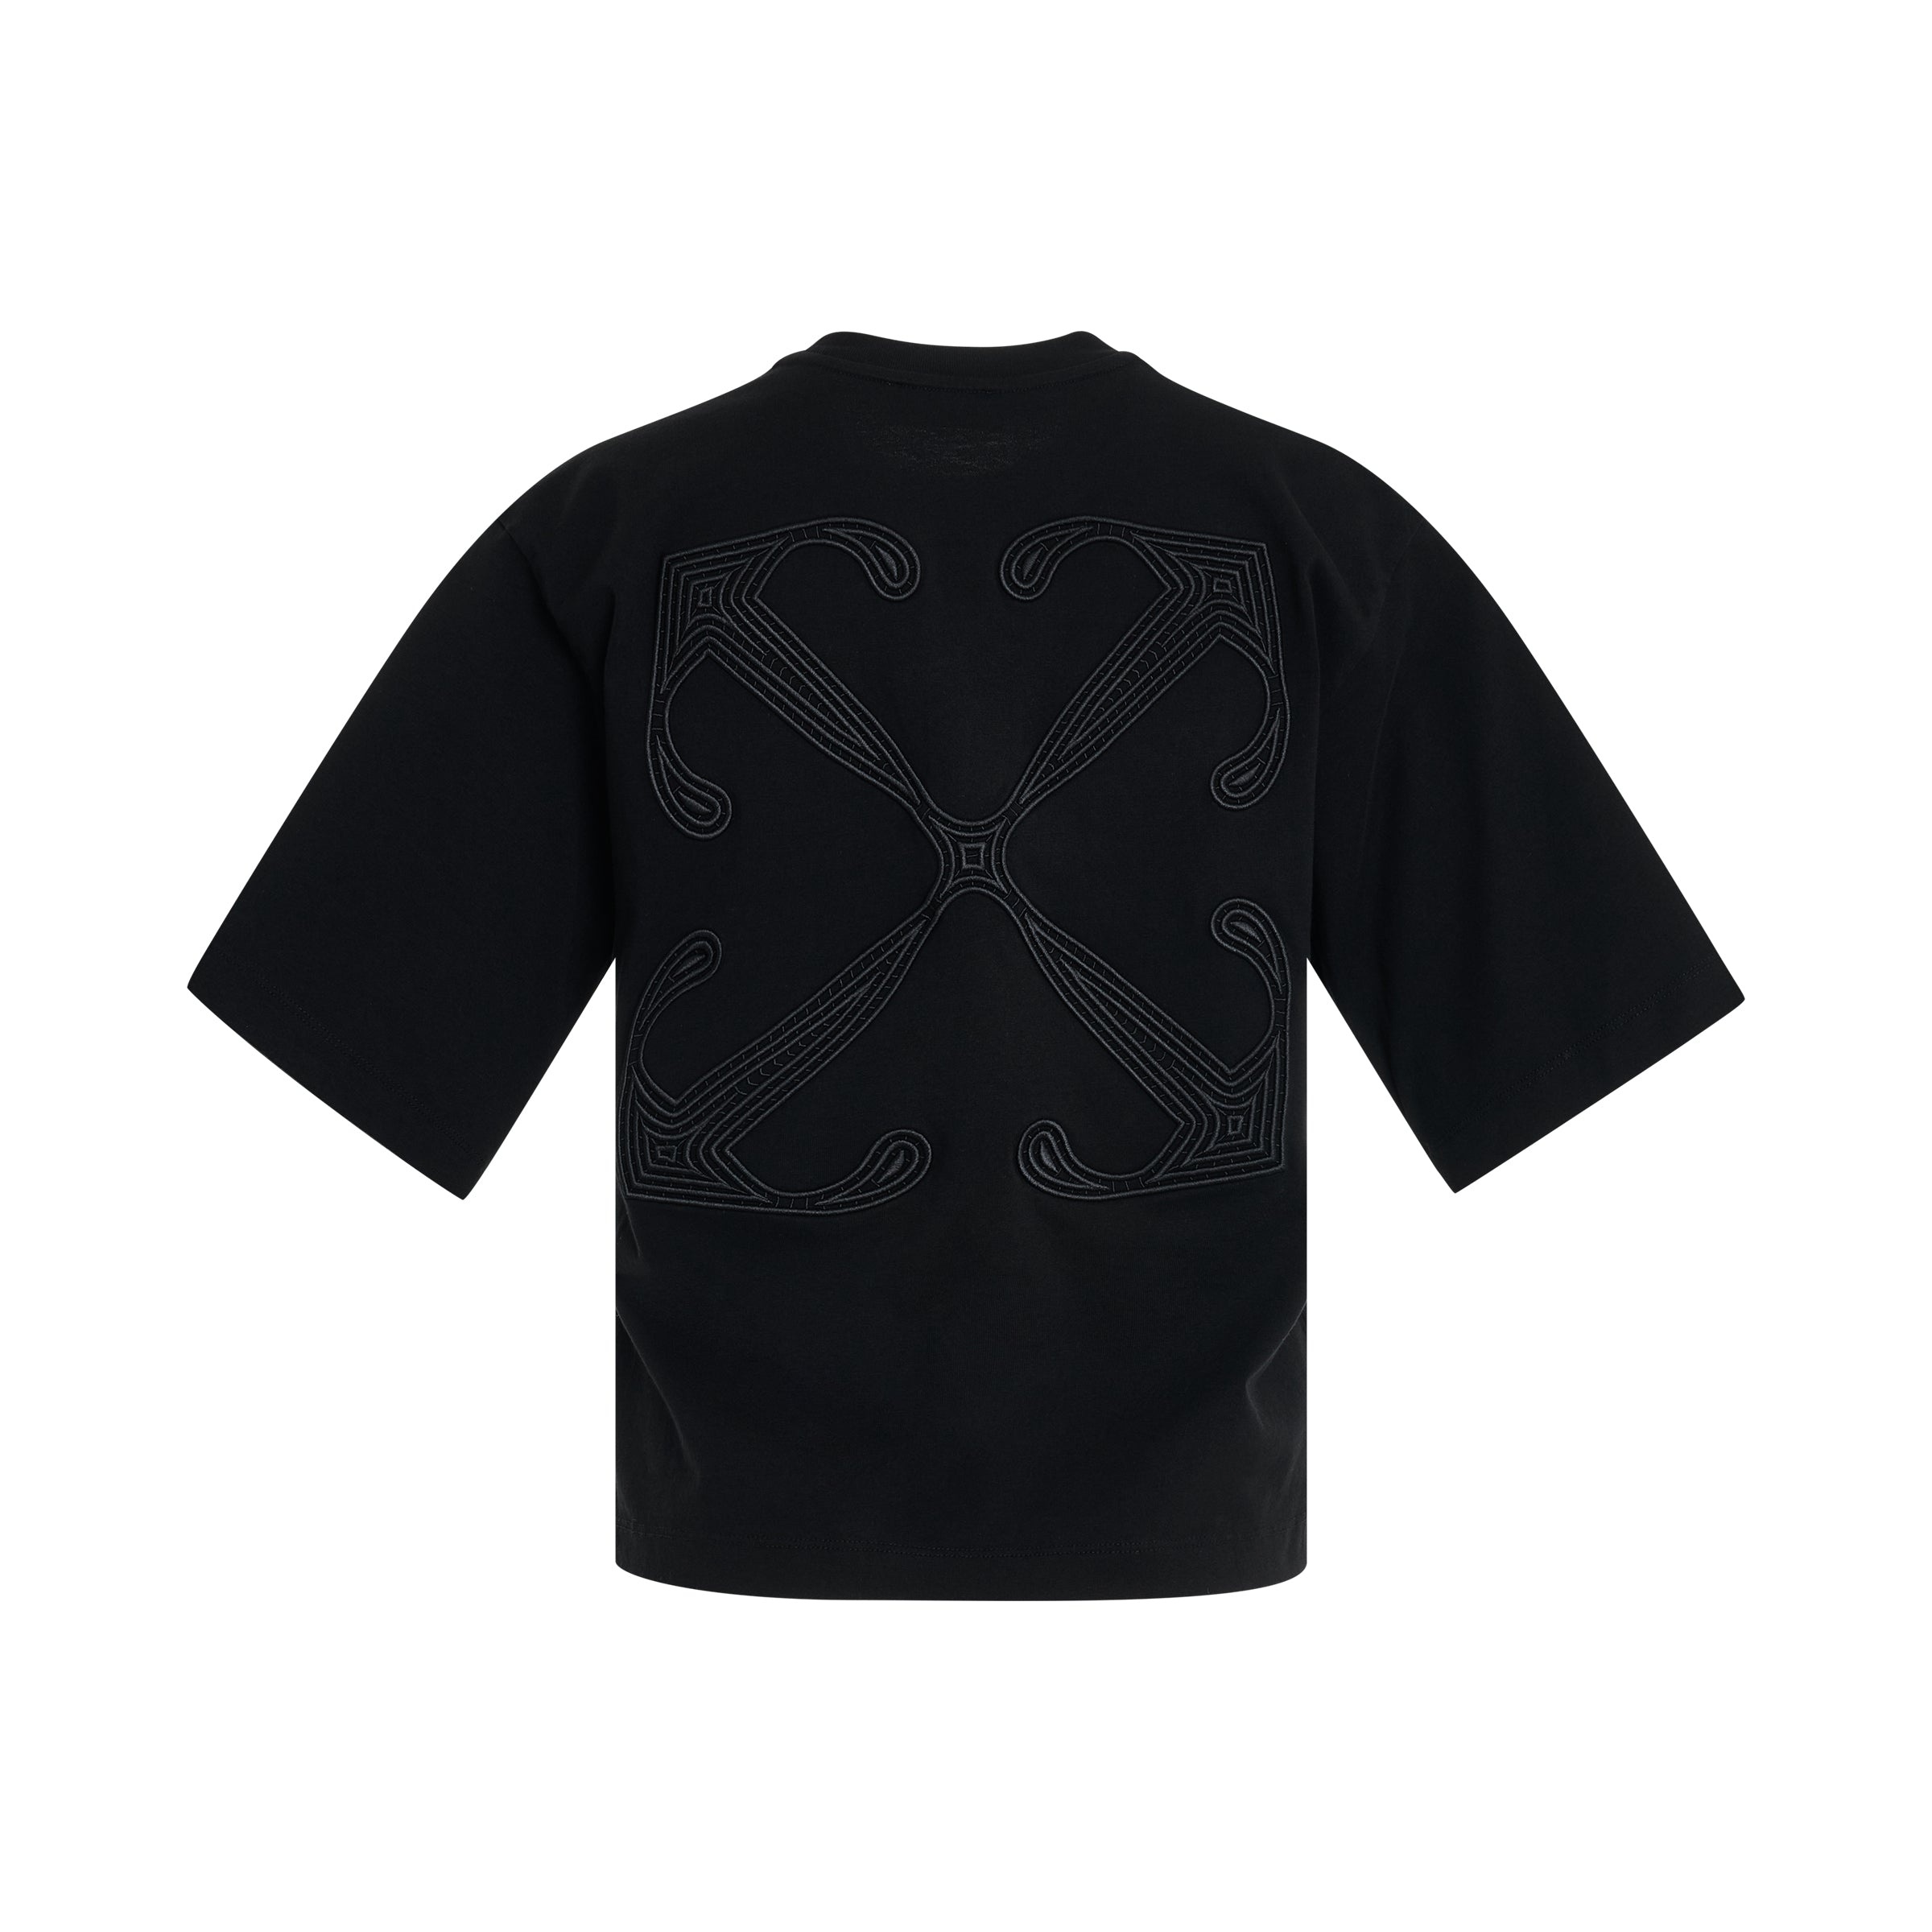 Embroidered Arrow Basic T-Shirt in Black - 4